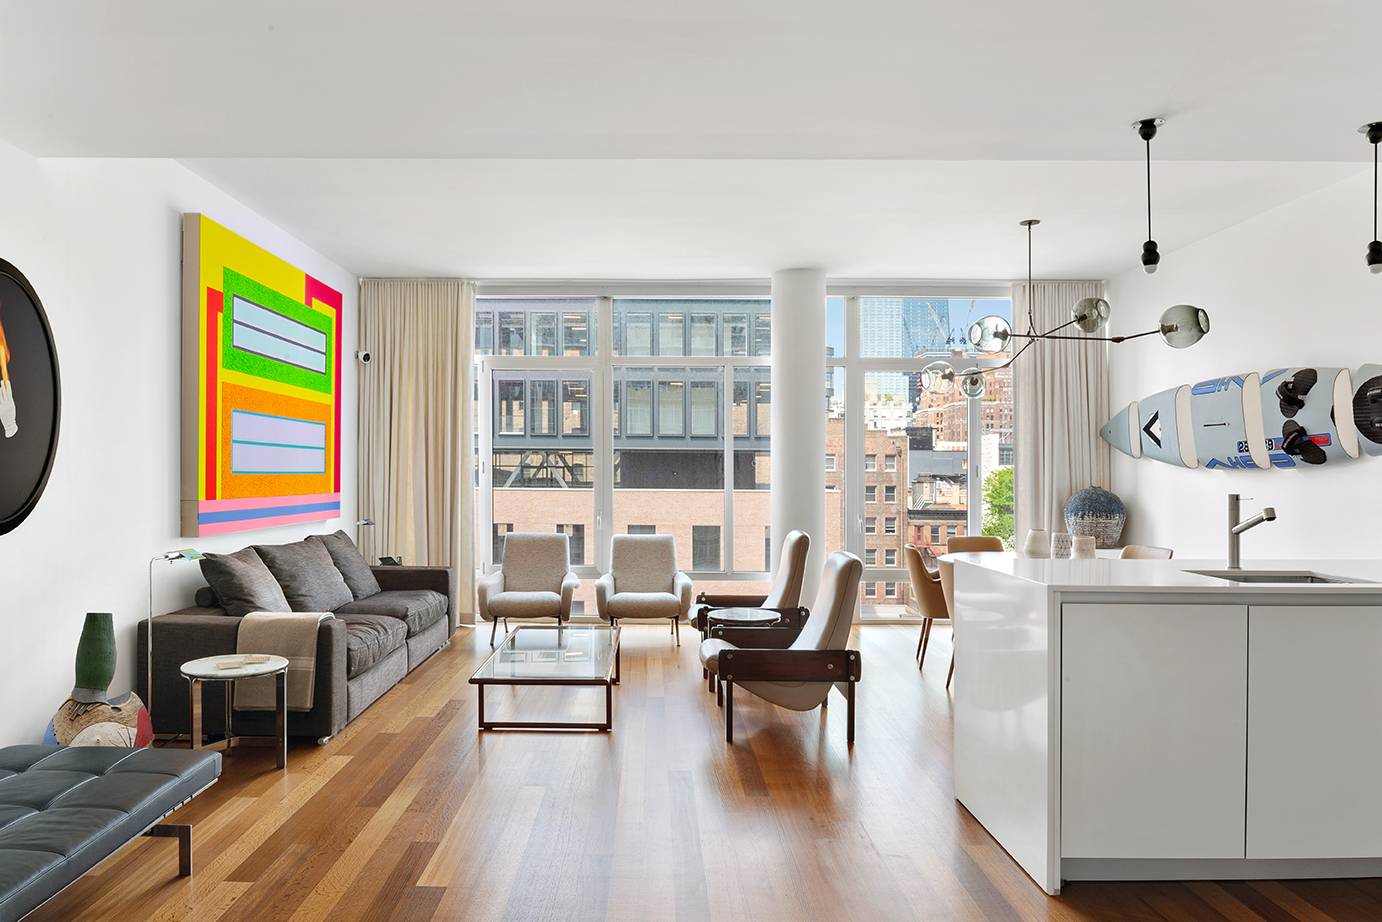 COMPLETELY RENOVATED ! Perched above West Chelsea's Contemporary Art Gallery District, equidistant between the New COMPLETELY RENOVATED !